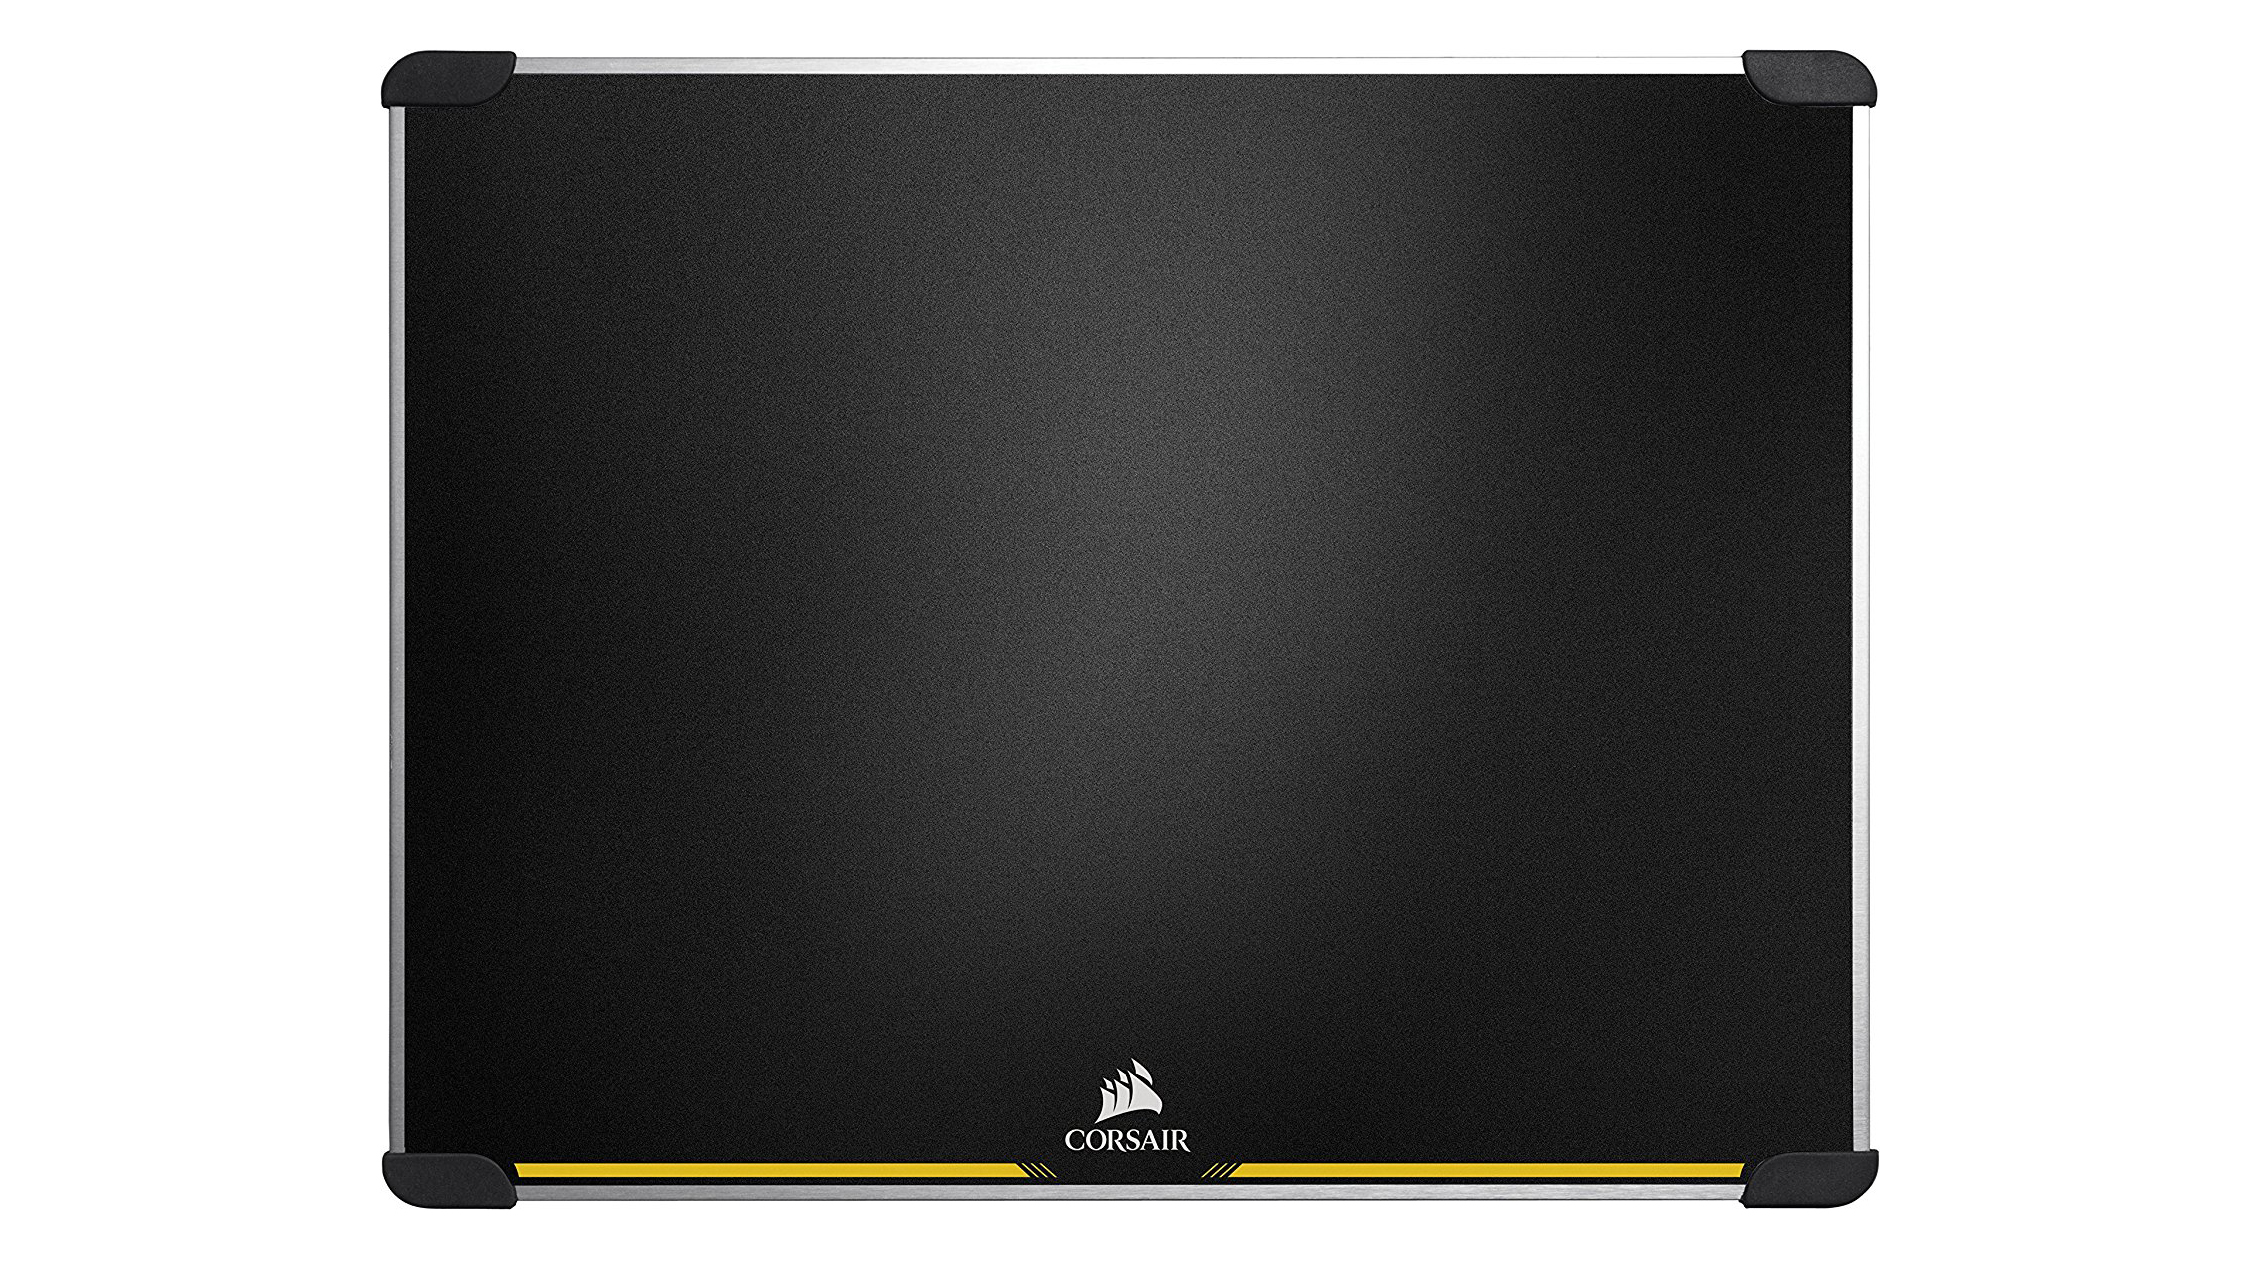 Corsair MM600 from the top on a white background